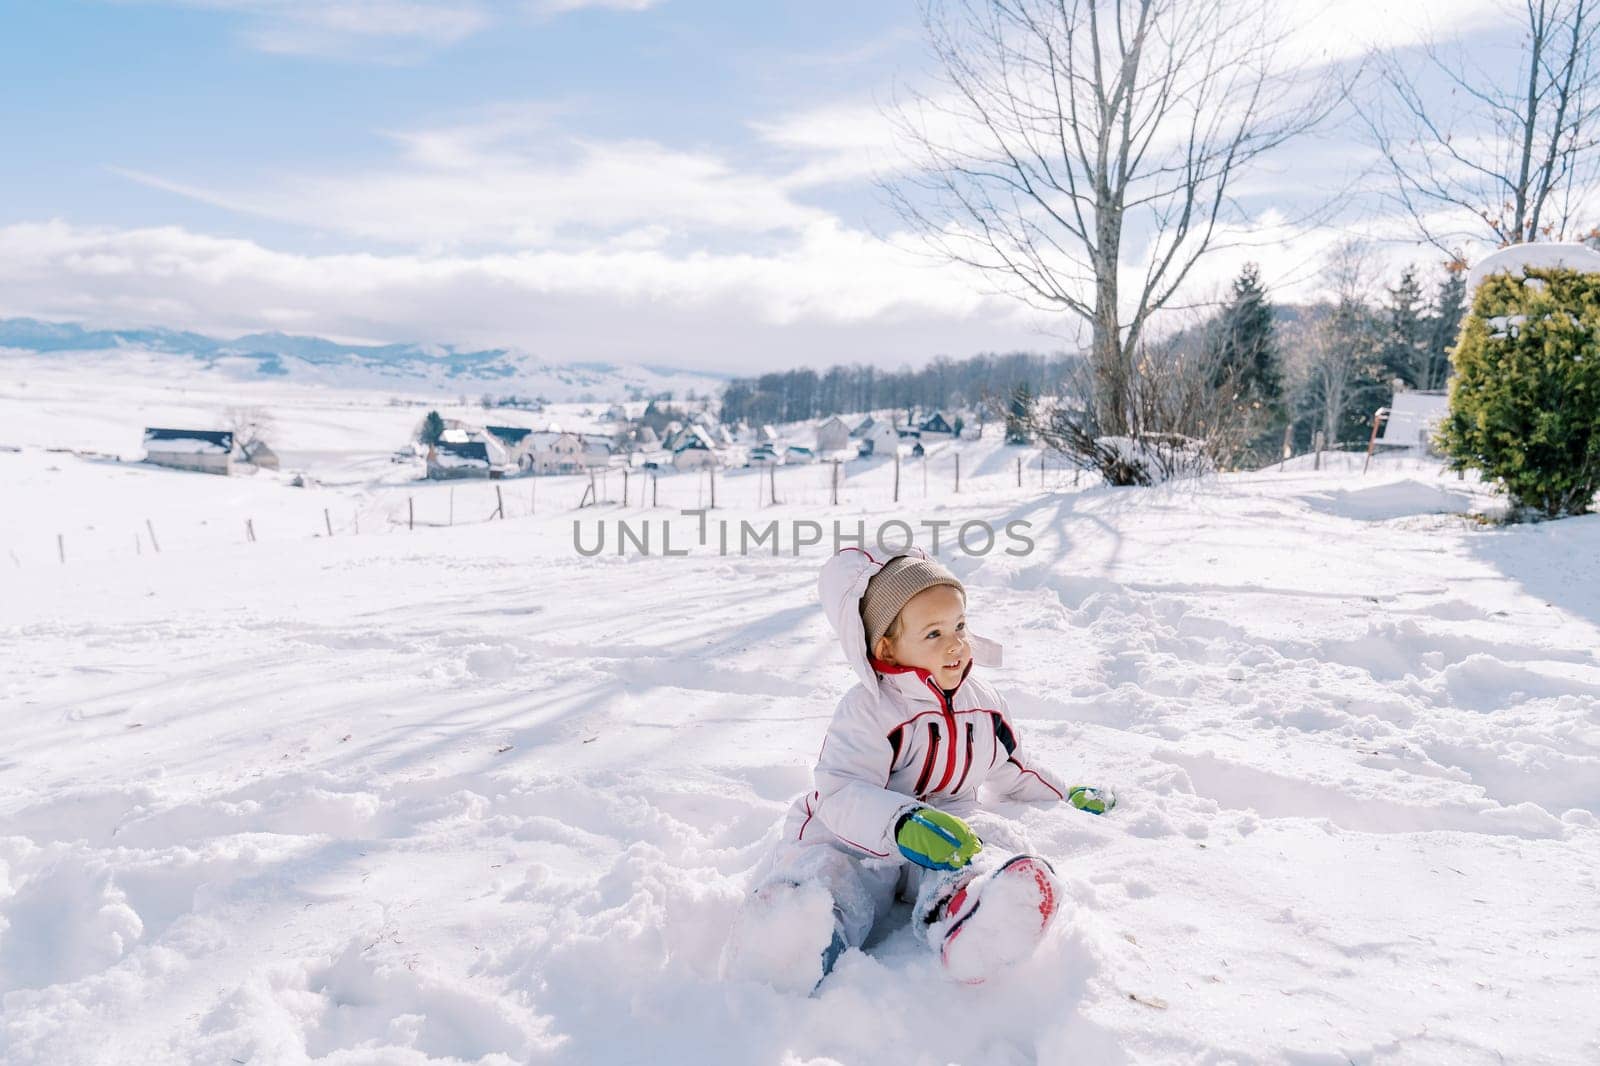 Little girl sits half-turned in a snowdrift and looks away. High quality photo